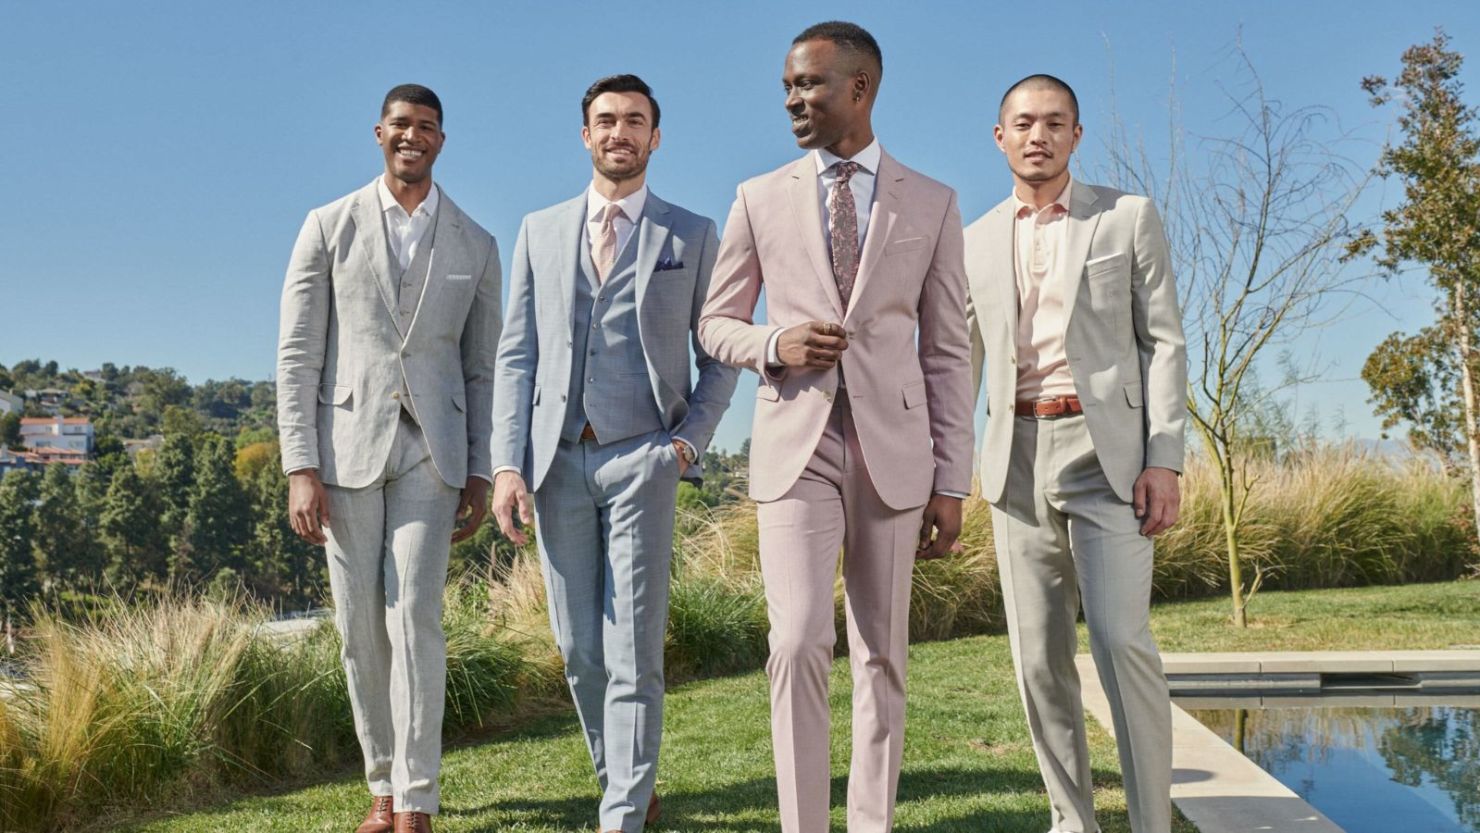 7 Men’s Wearhouse styles to be the best-dressed wedding guest | CNN ...